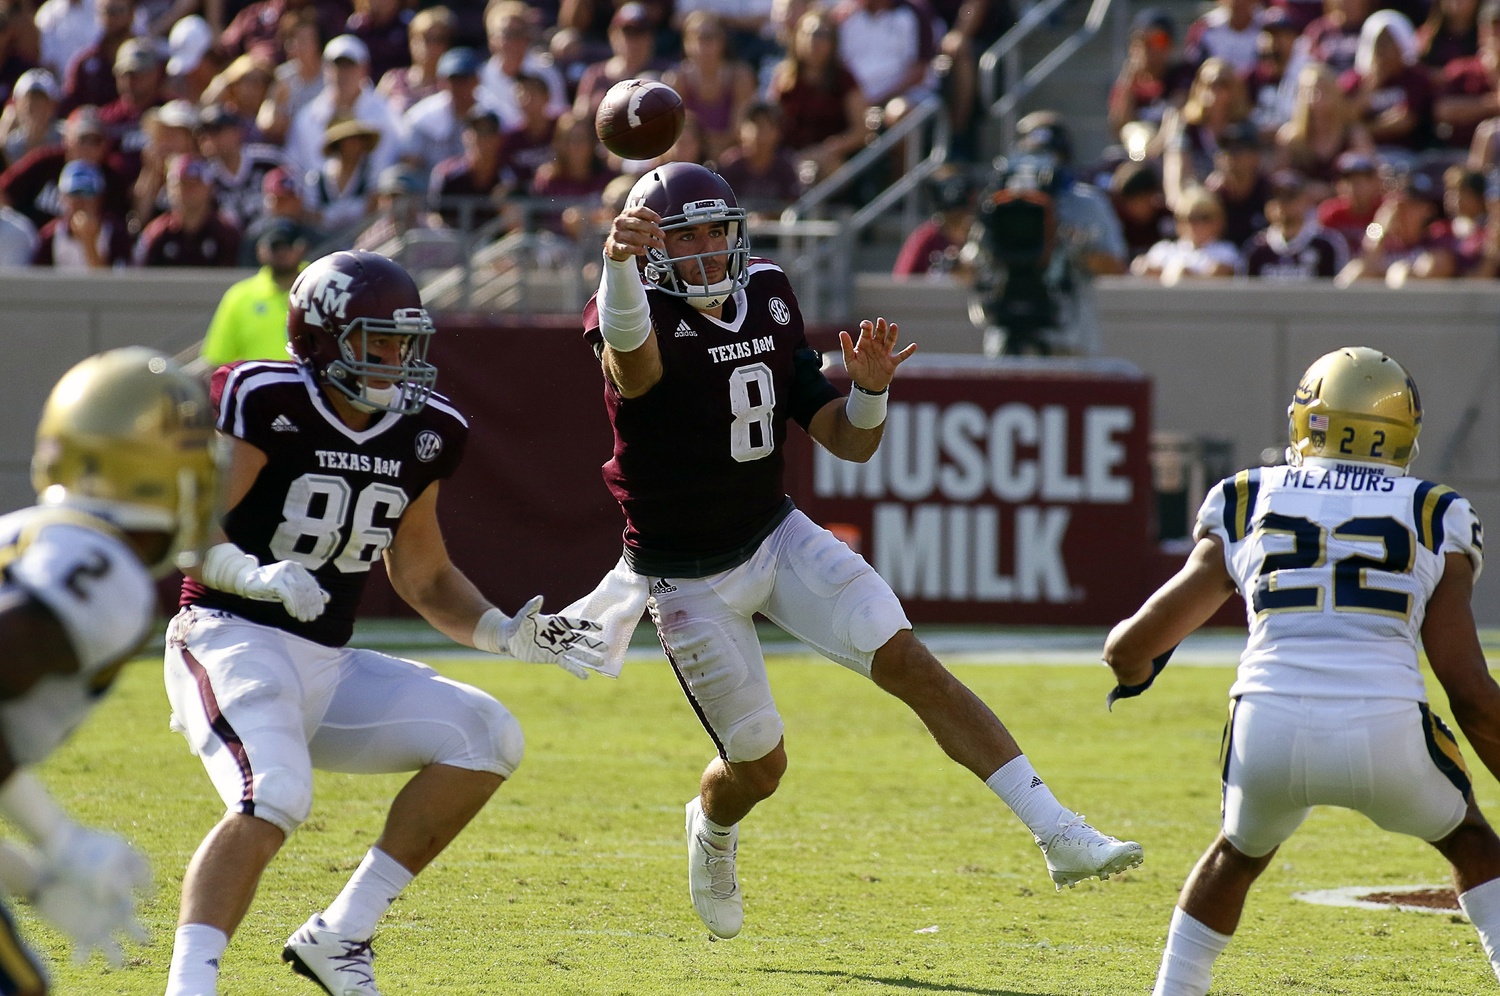 Sep 3, 2016; College Station, TX, USA; Texas A&M Aggies quarterback Trevor Knight (8) passes against the UCLA Bruins during the second half at Kyle Field. Texas A&M won in overtime 31-24. Mandatory Credit: Ray Carlin-USA TODAY Sports